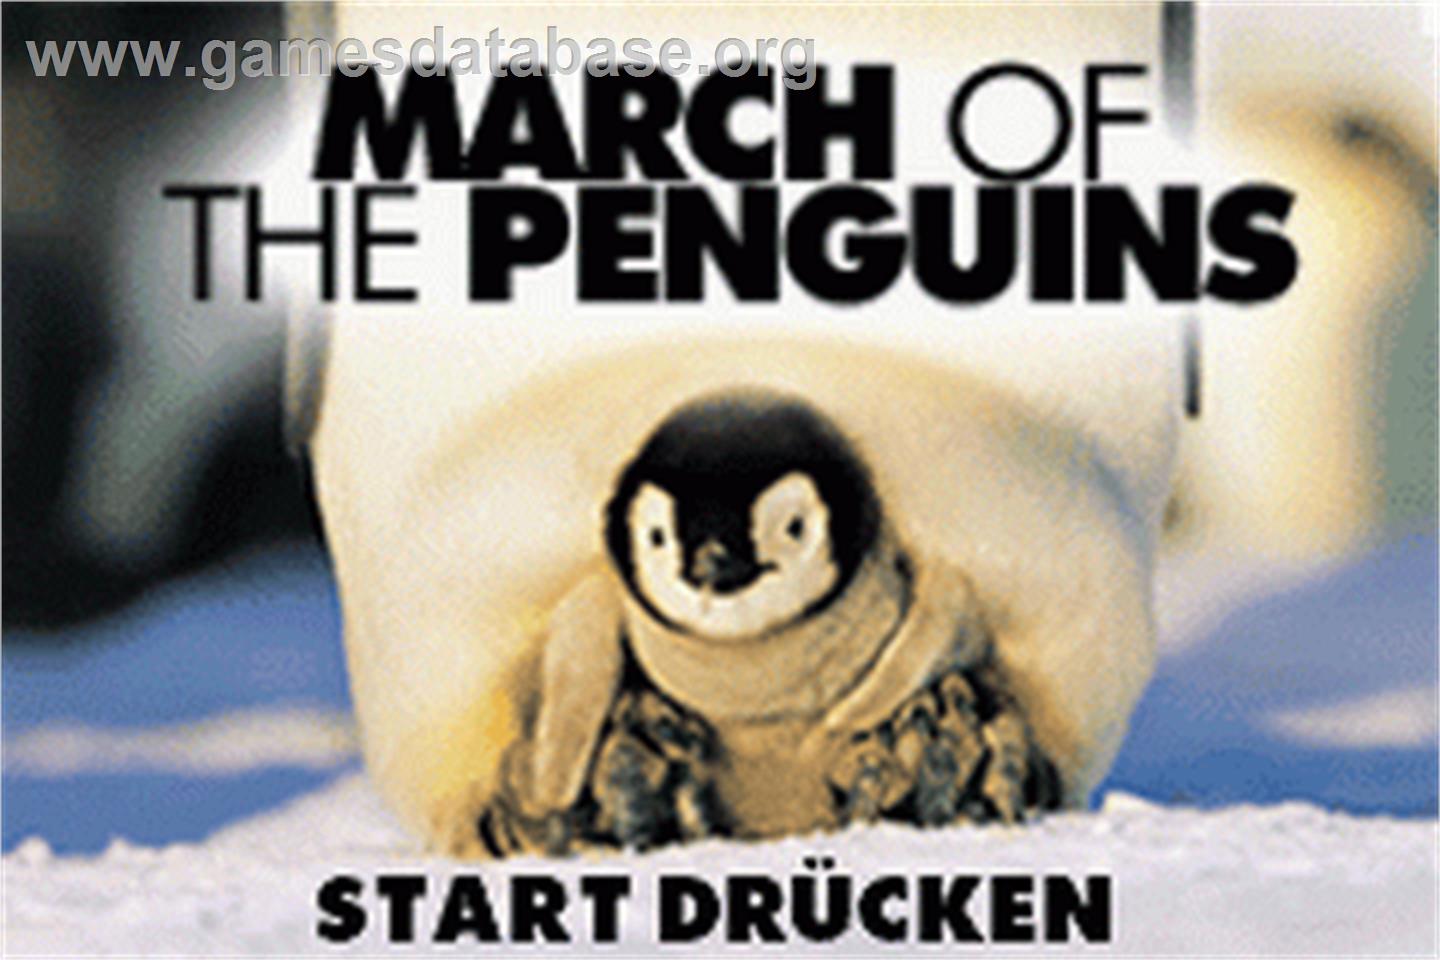 March of the Penguins - Nintendo Game Boy Advance - Artwork - Title Screen